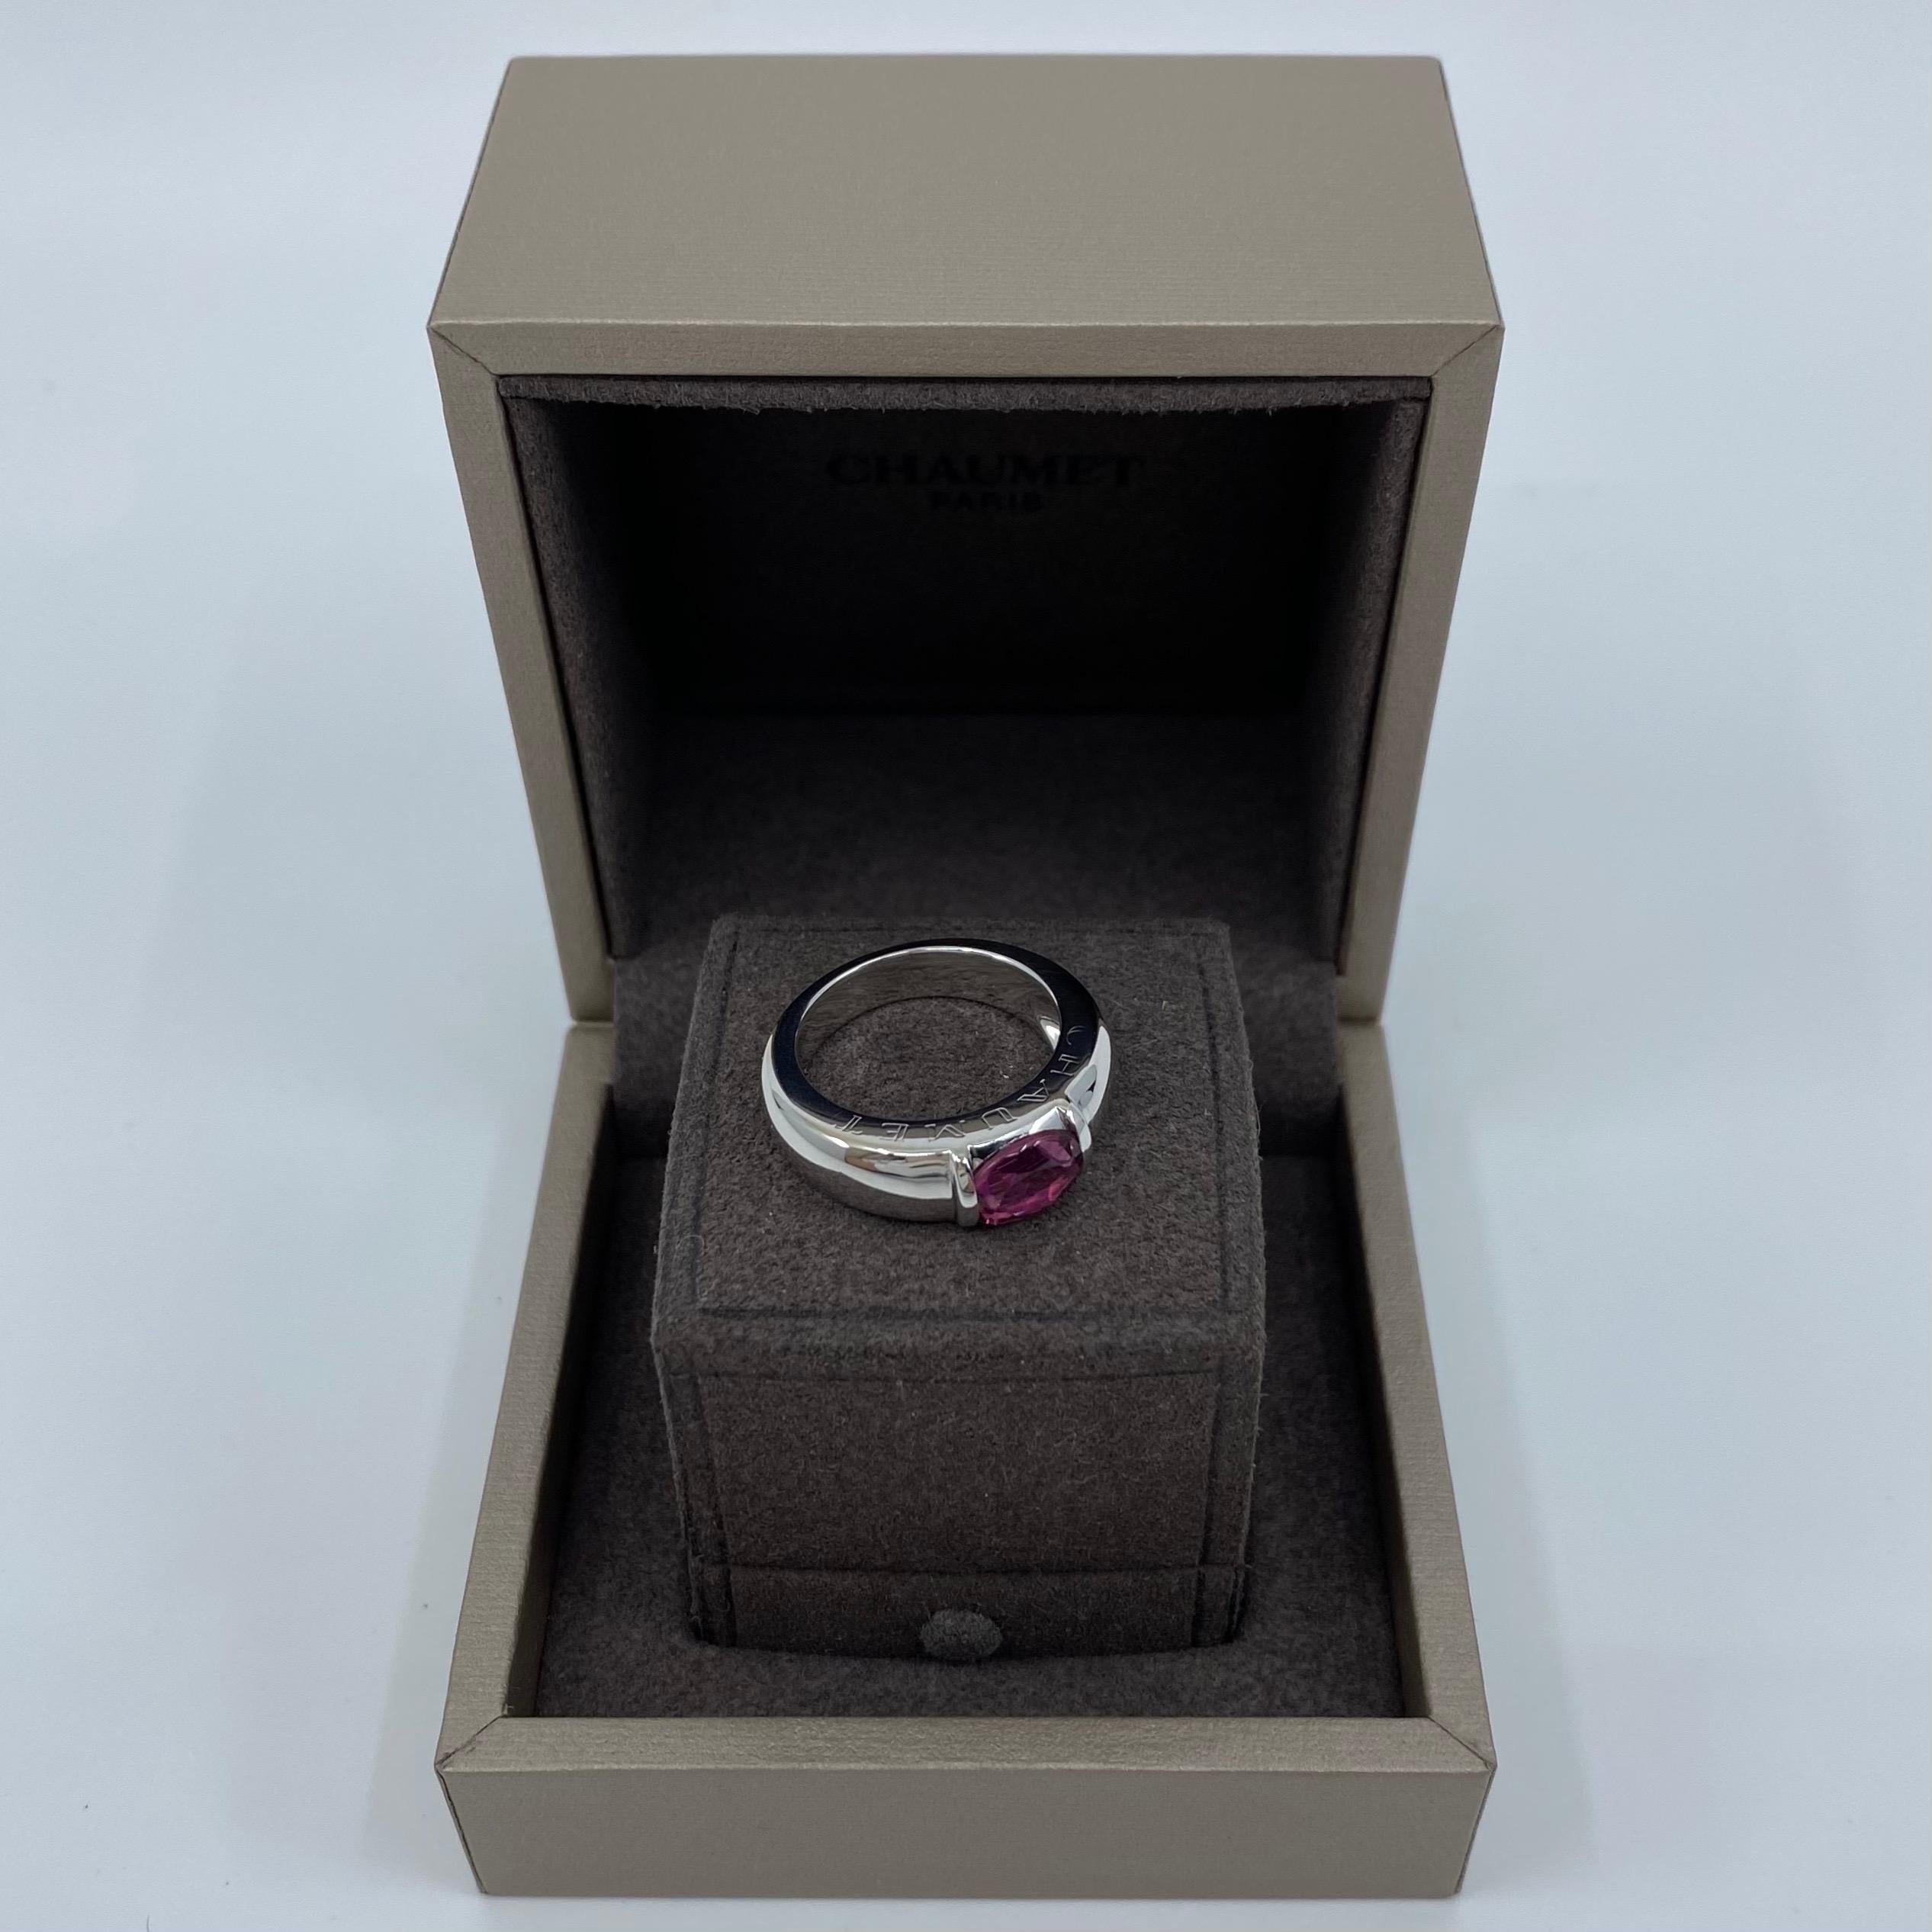 Rare Vintage Chaumet Paris Pink Tourmaline 18k White Gold Ring & Chaumet Box In Excellent Condition For Sale In Birmingham, GB